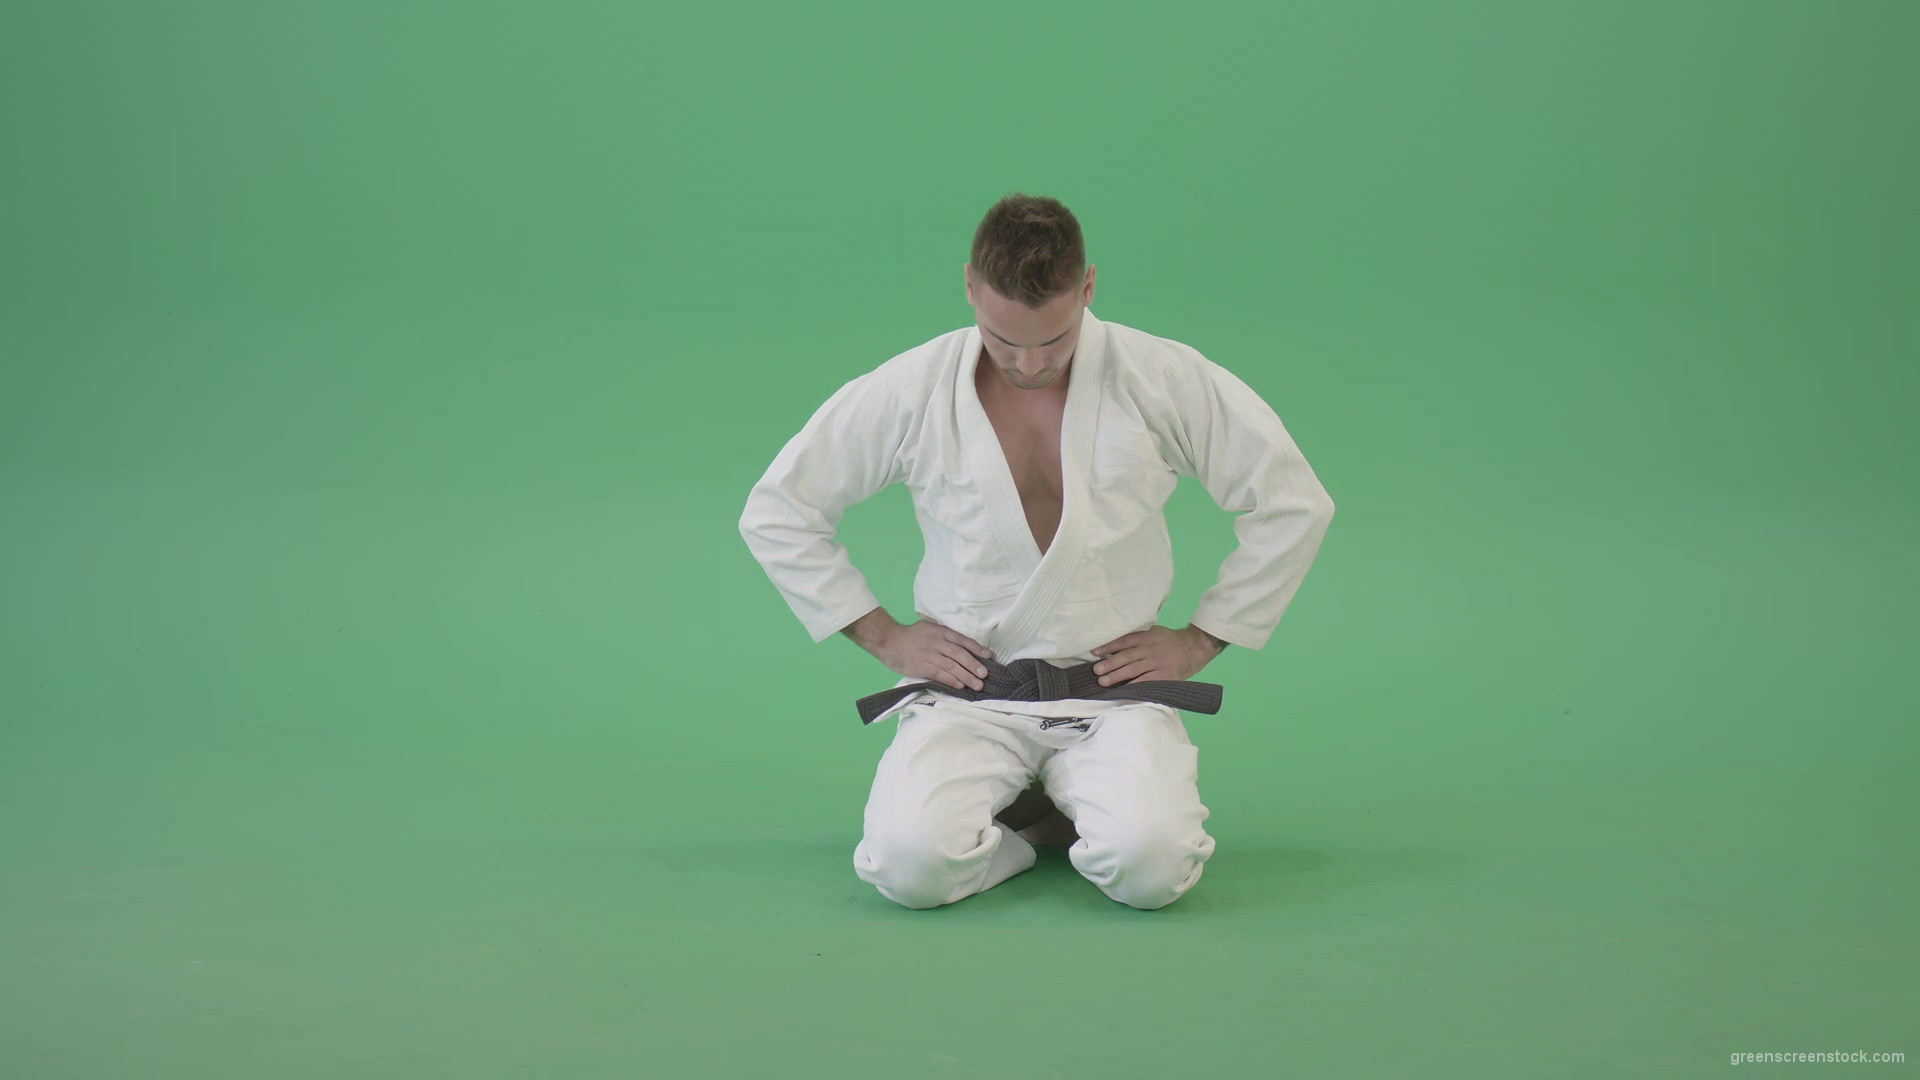 Jujutsu-Sport-man-meditating-and-breathing-slowly-isolated-on-green-screen-4K-Video-Footage-1920_009 Green Screen Stock